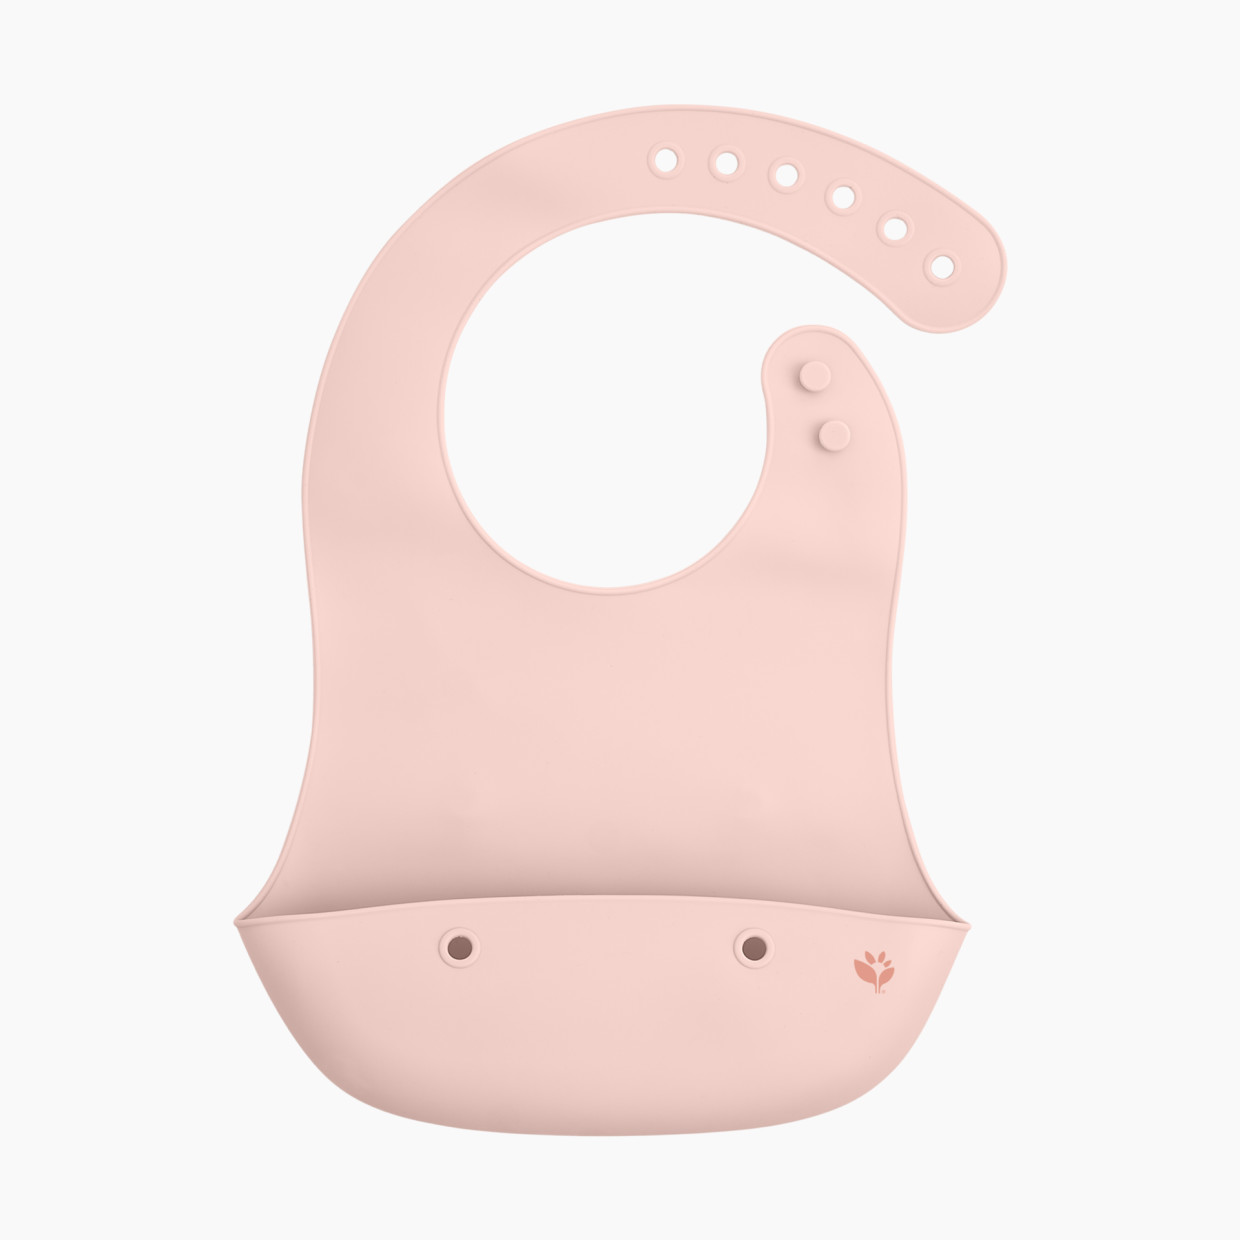 GREEN SPROUTS Silicone Scoop Bib - Light Grapefruit.